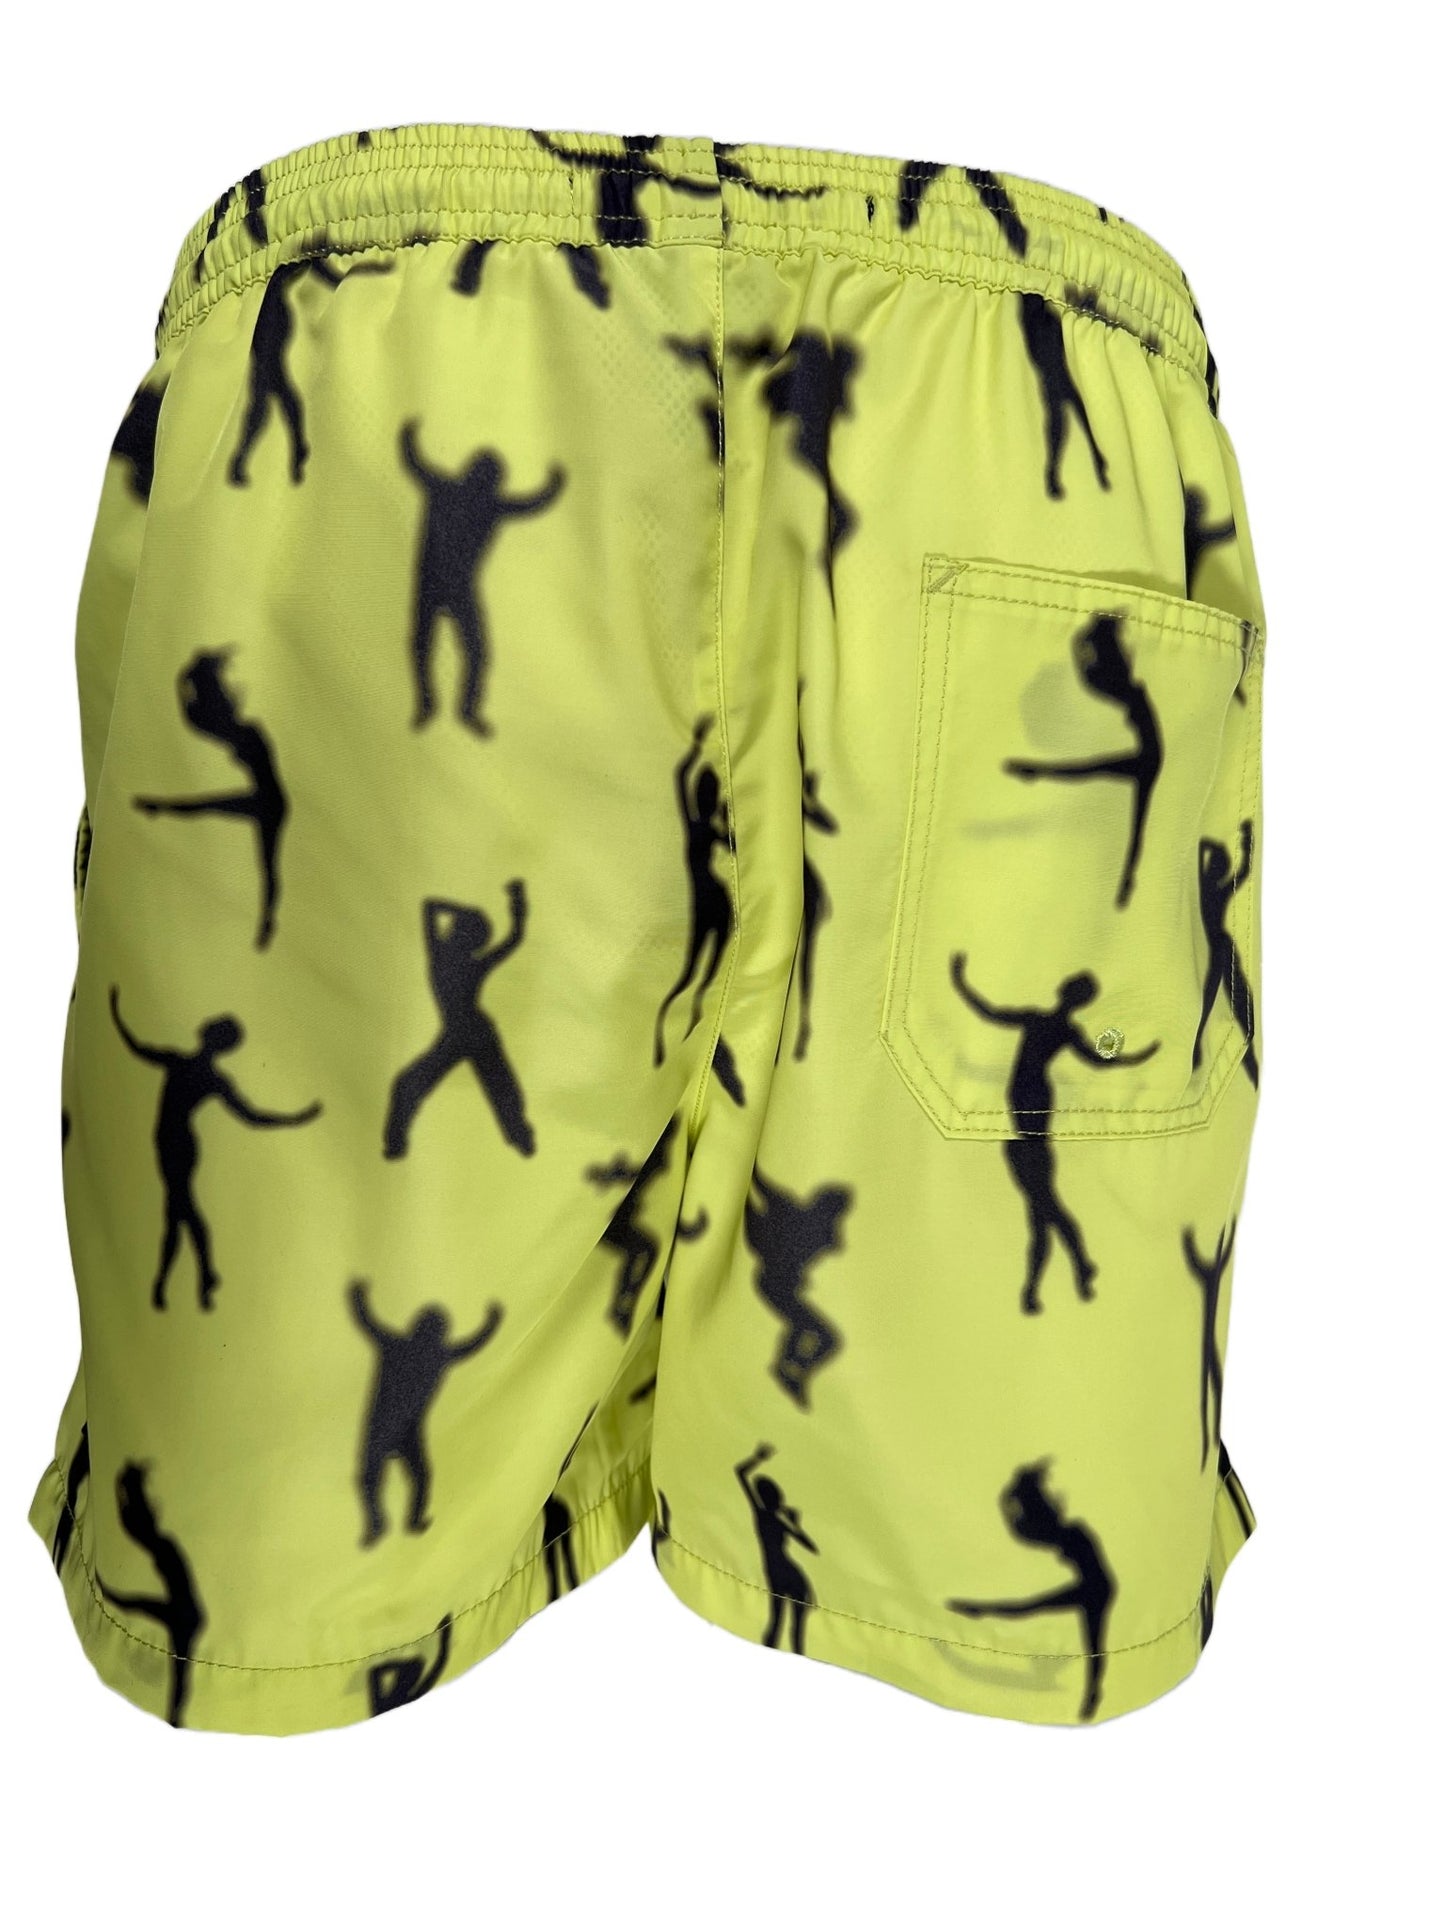 A yellow water resistance KSUBI Dance Klass Boardshort with black and yellow people on it, featuring an elastic waistband.